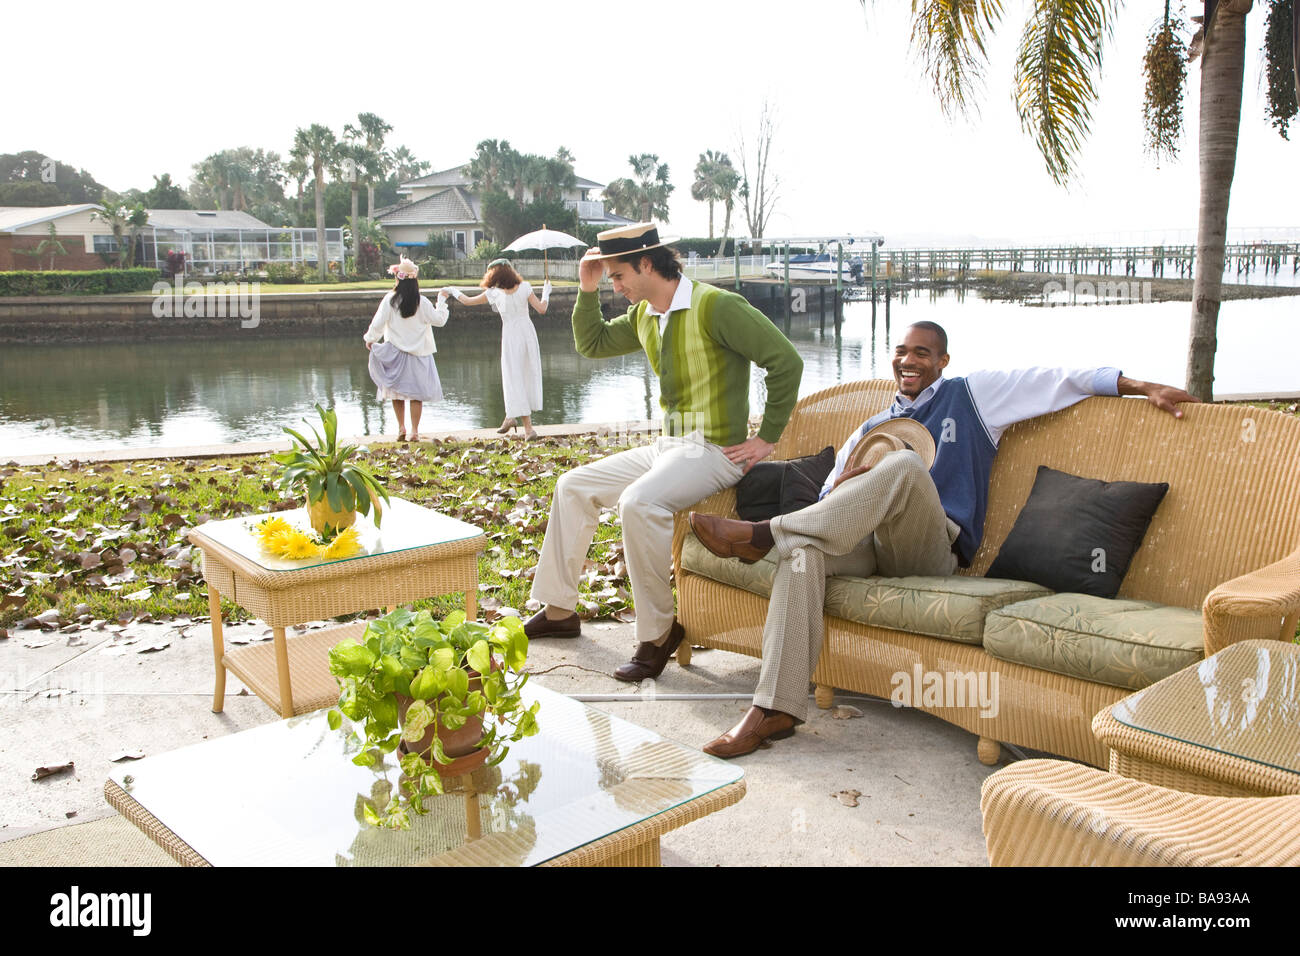 Portrait of 1920s socialite men relaxing at garden party on water's edge Stock Photo